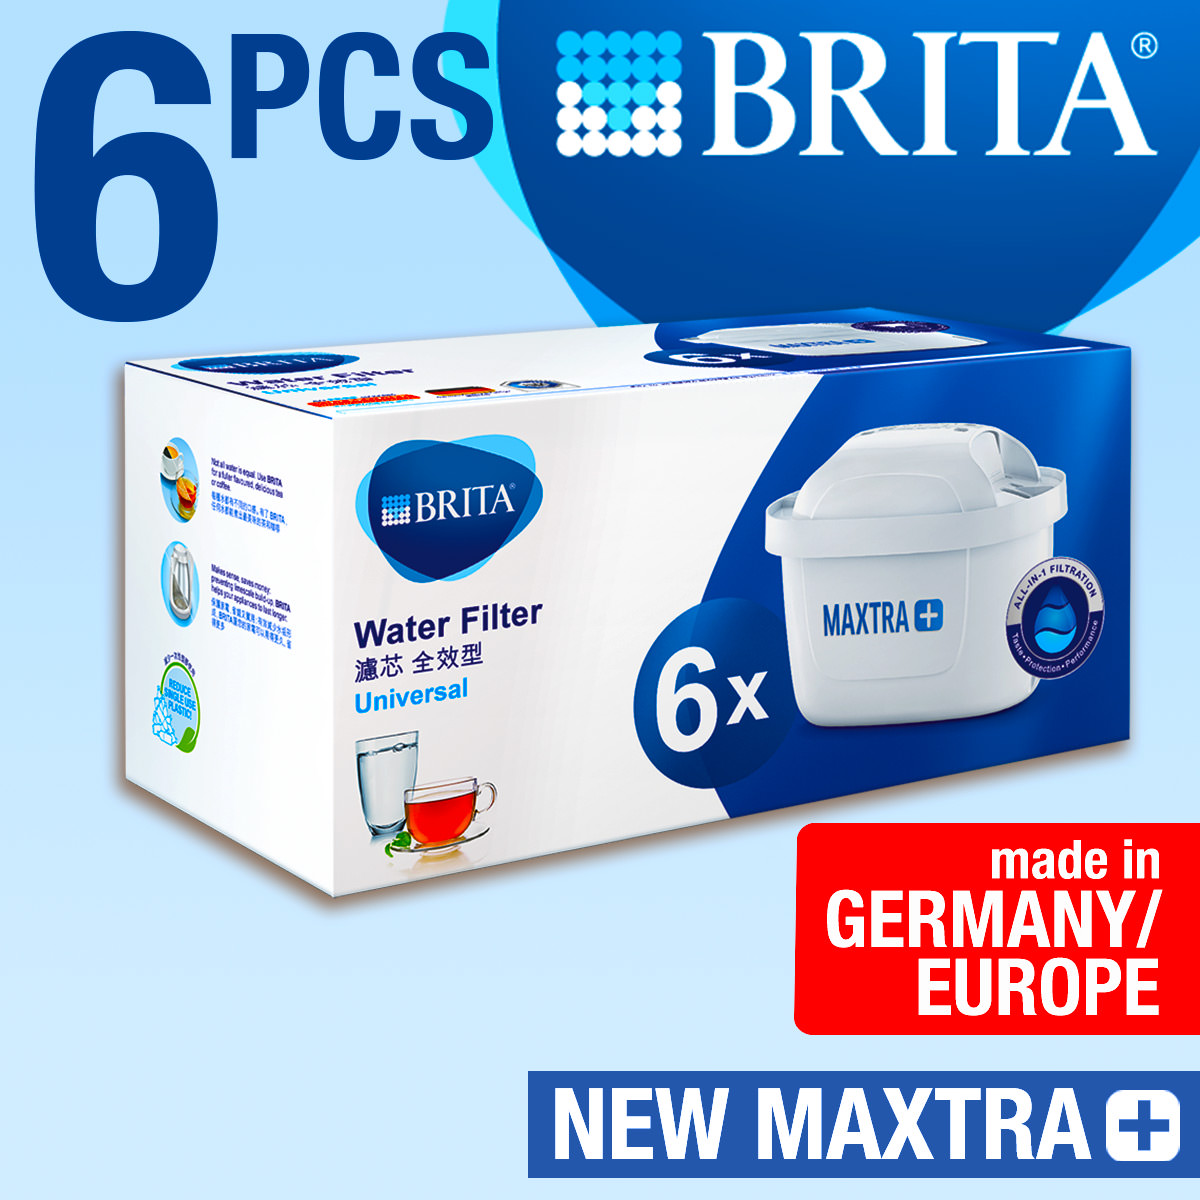 Brita MAXTRA + Micro Flow pcs of Lazada Singapore in | Germany 6), Made (2 12 boxes Cartridges